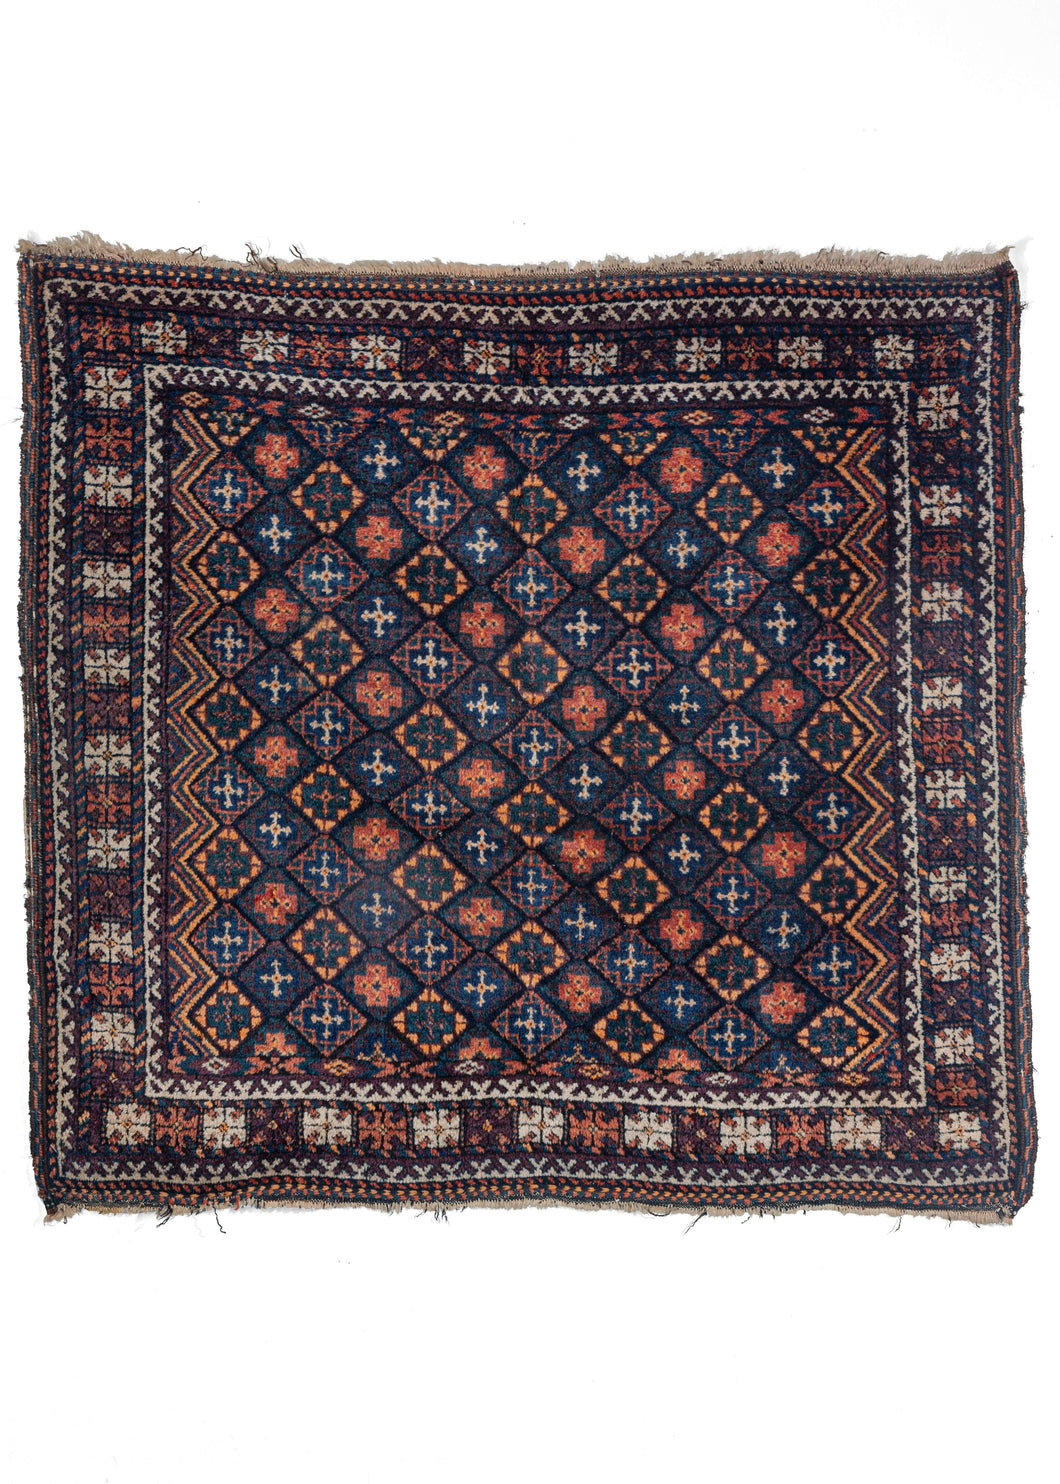 Antique Square Baluch Rug with repeating diamond pattern in deep blues and oranges